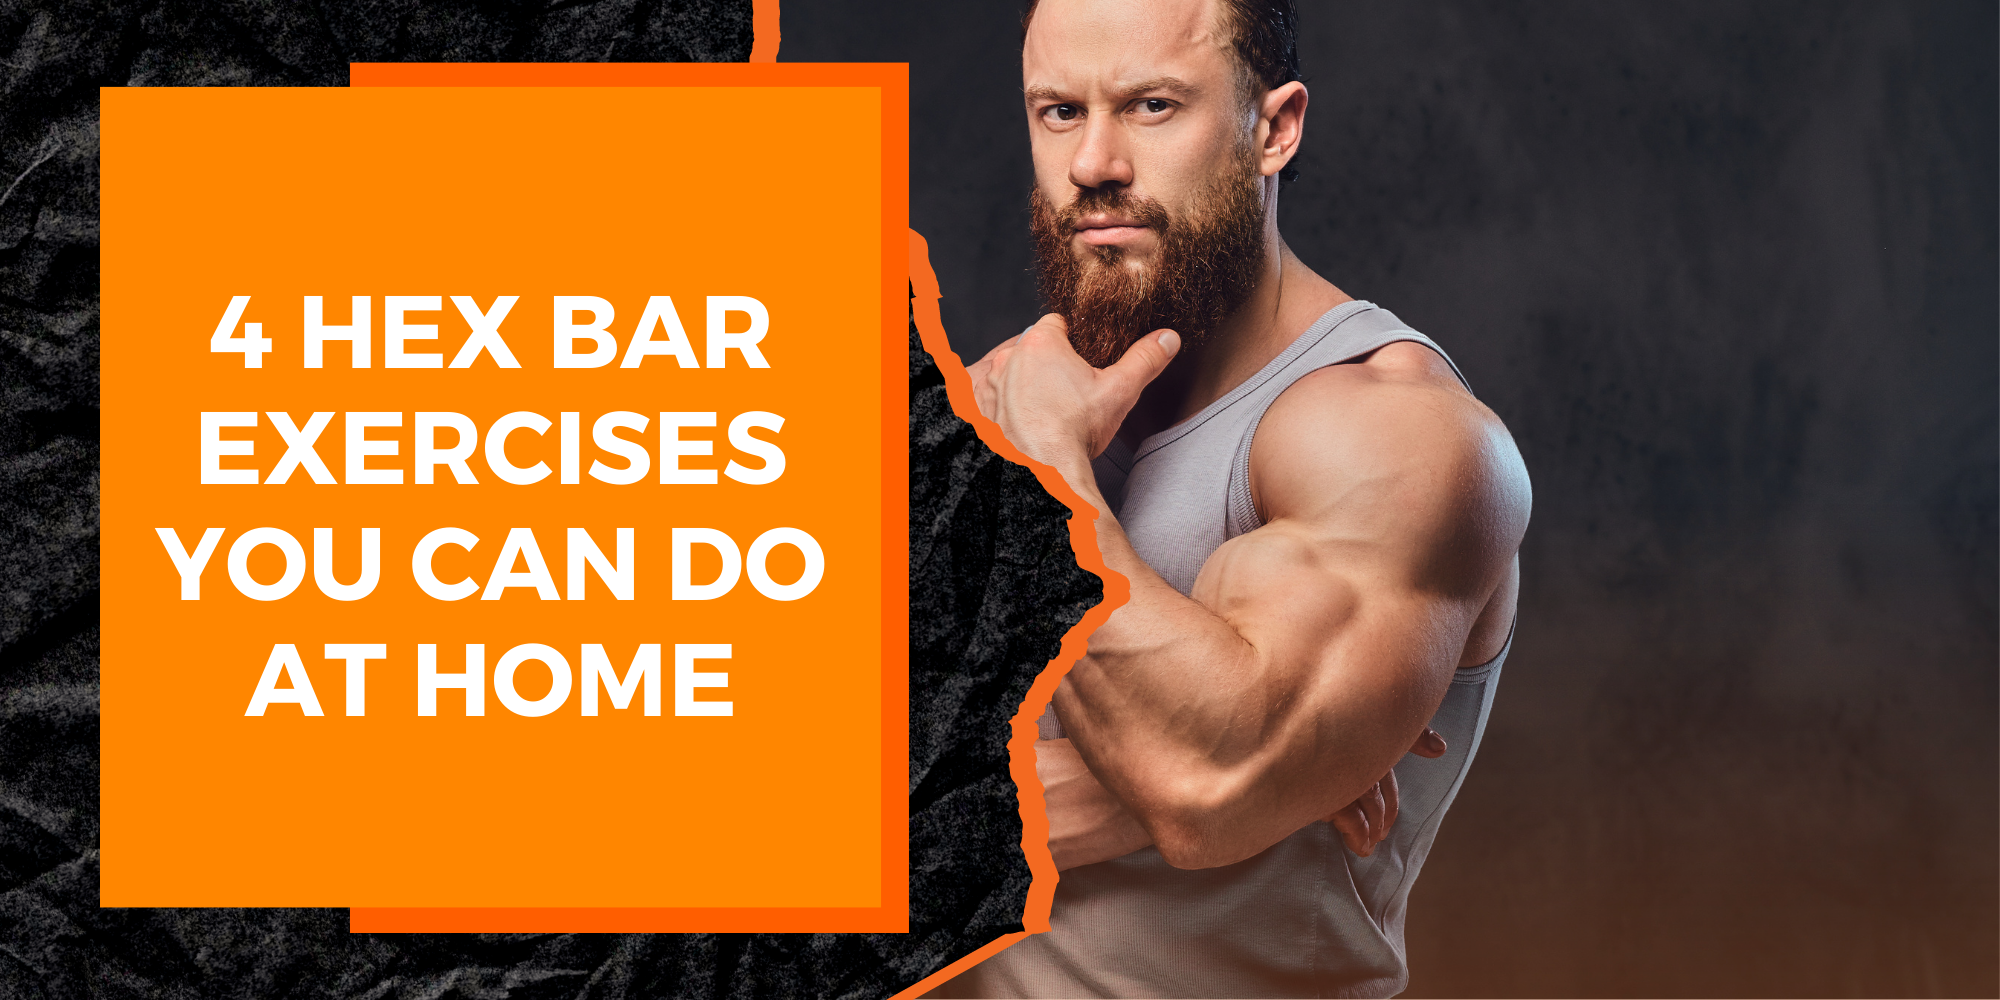 4 Hex Bar Exercises You Can Do at Home